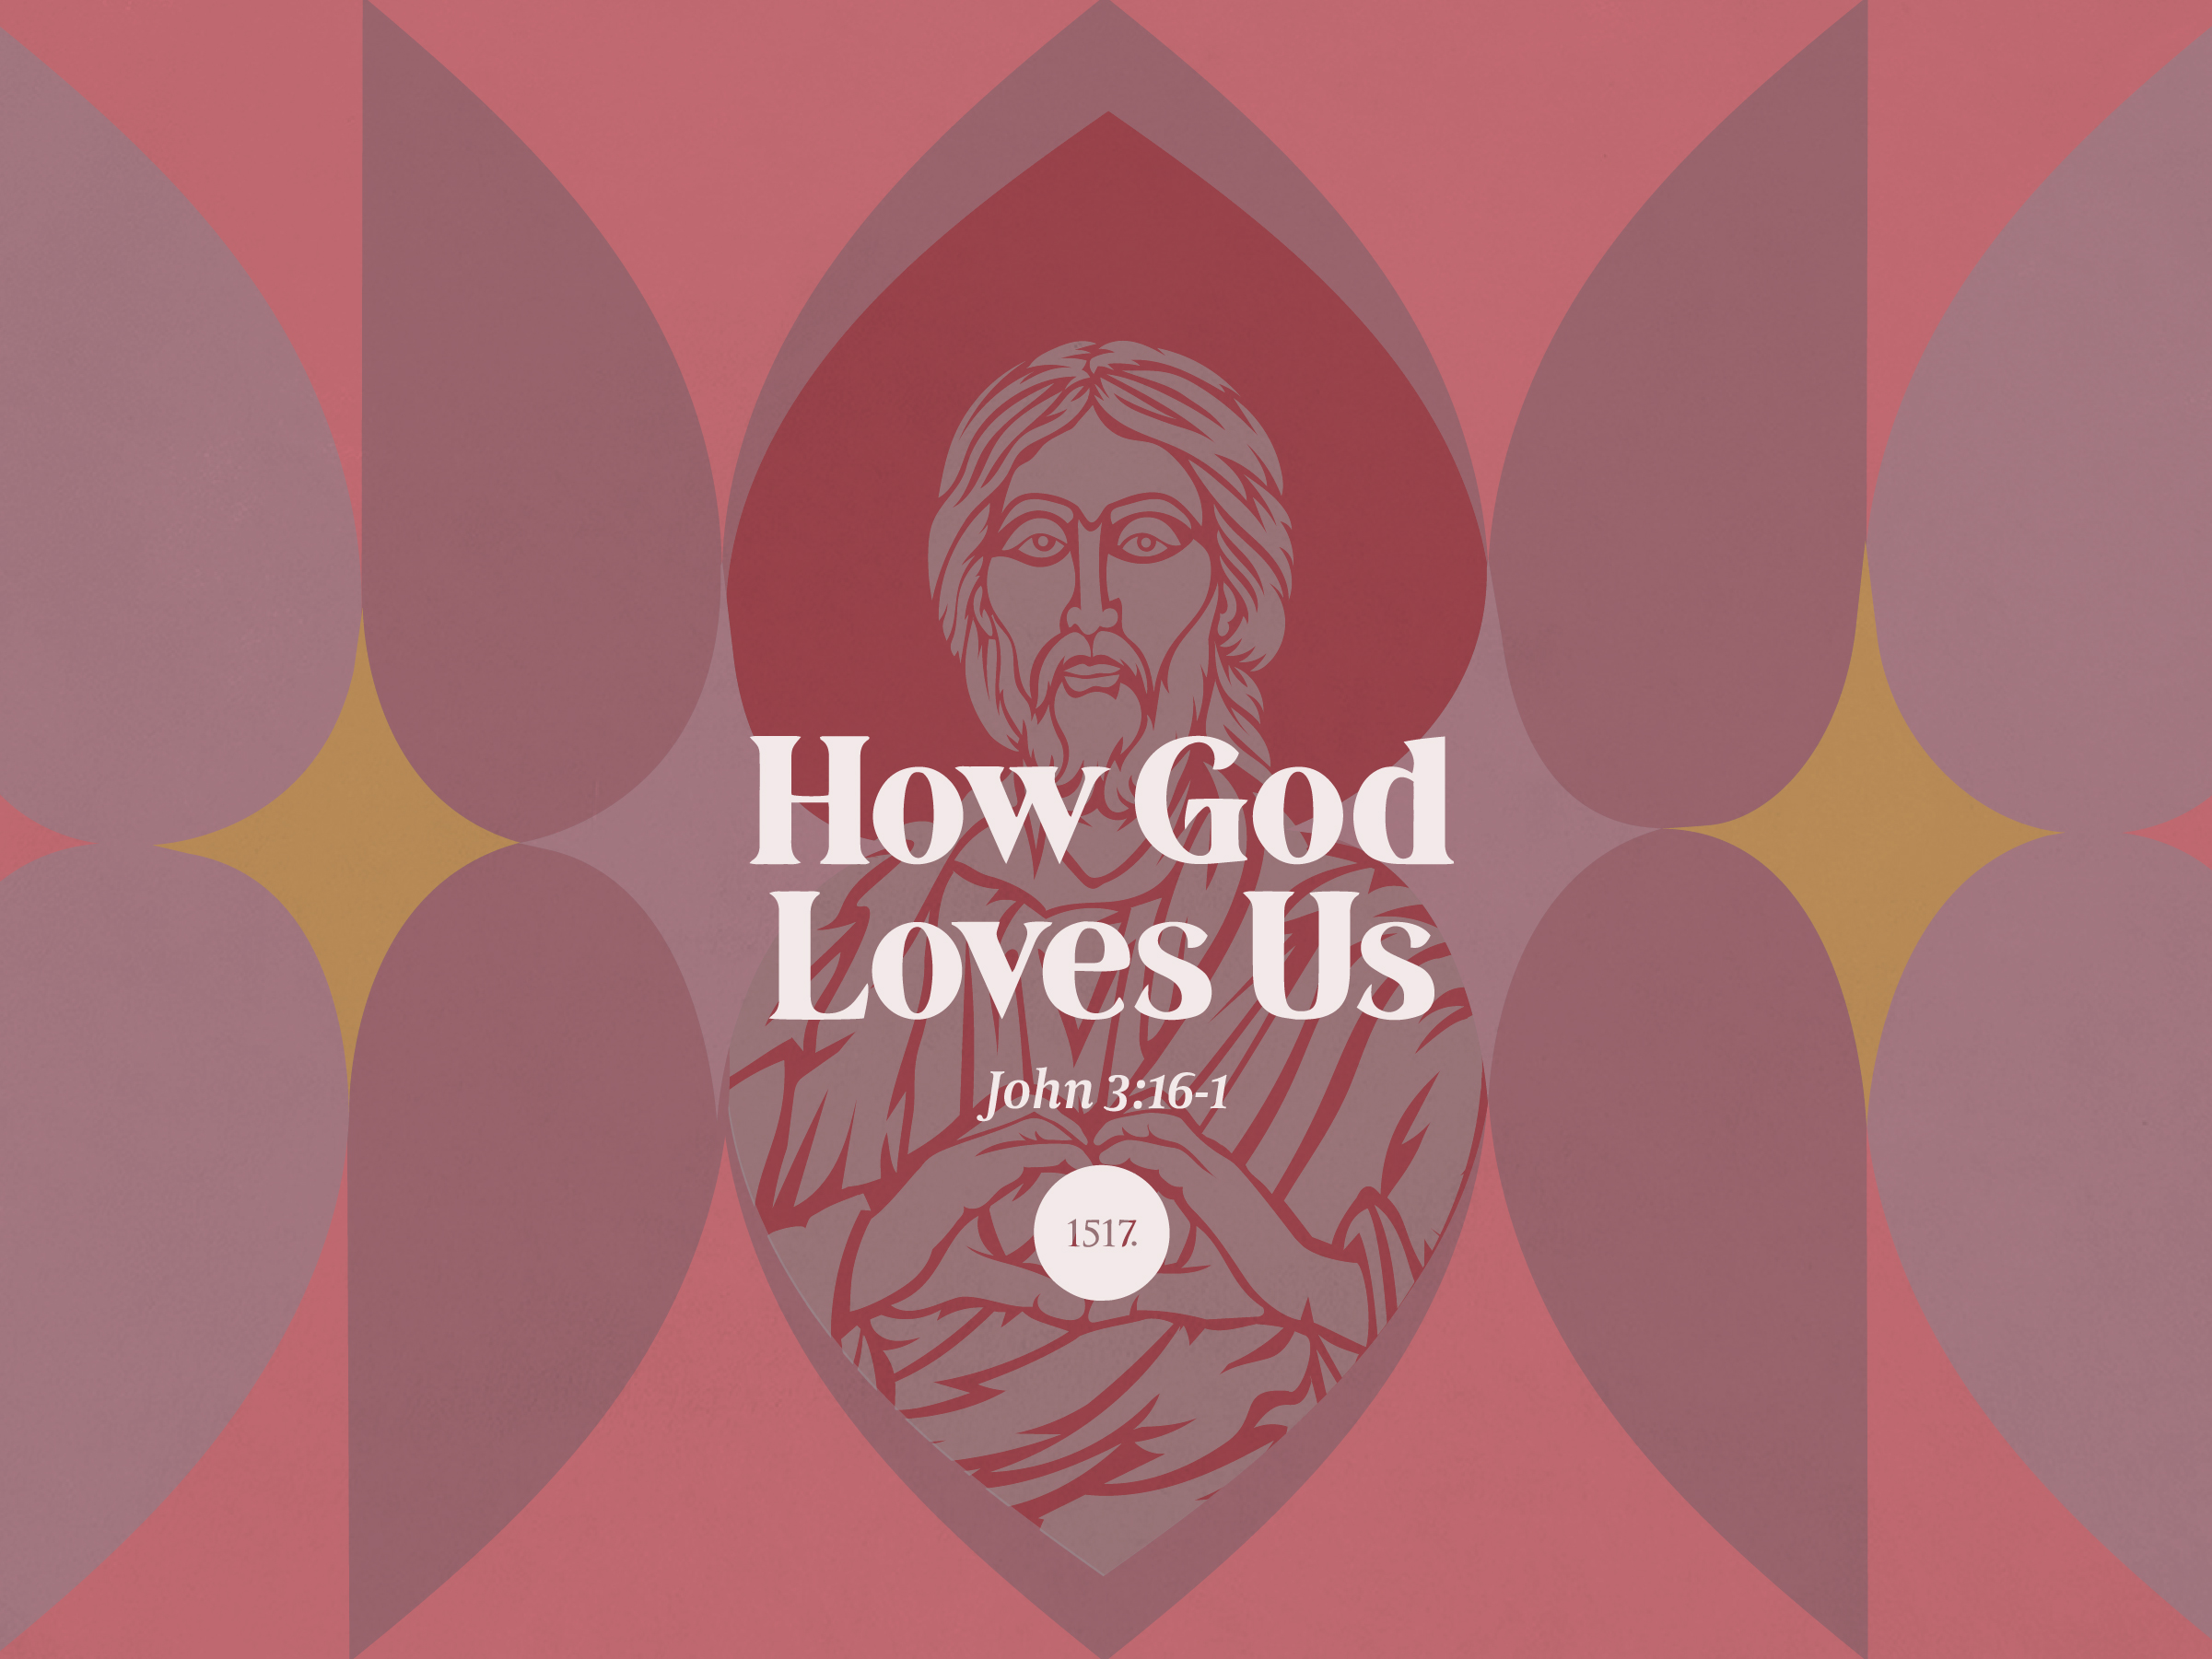 How God Loves Us: The Meaning of 